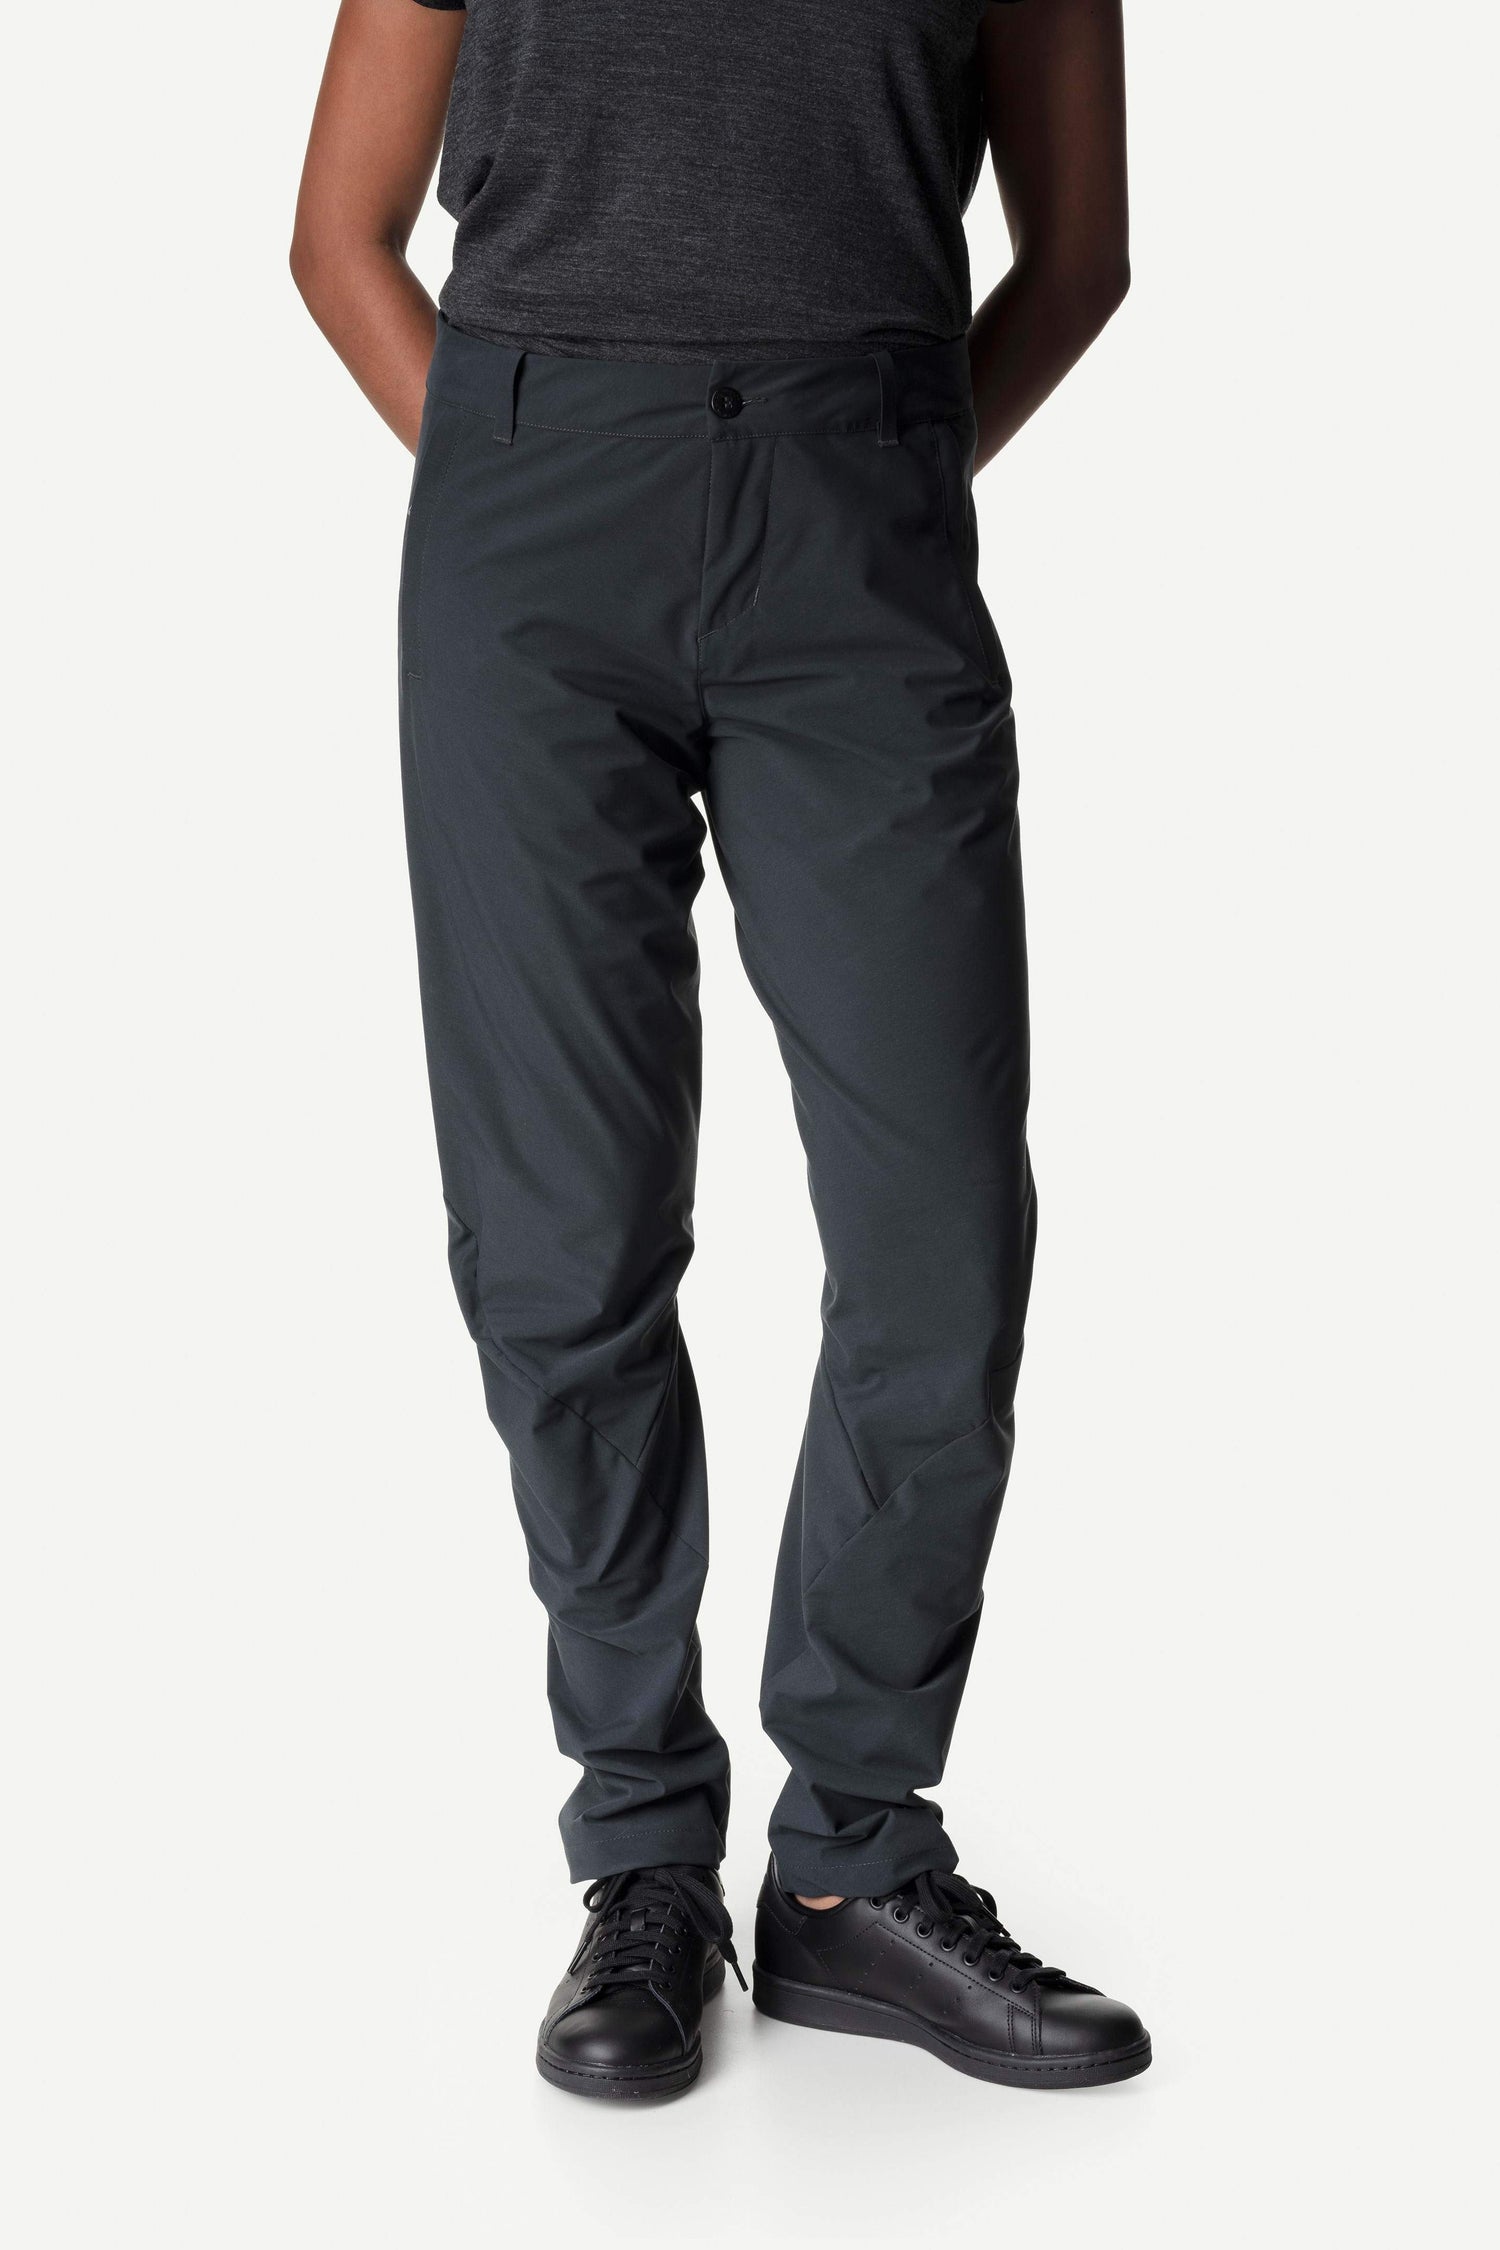 Houdini - W's MTM Thrill Twill Outdoor Pants - Recycled Polyester - Weekendbee - sustainable sportswear